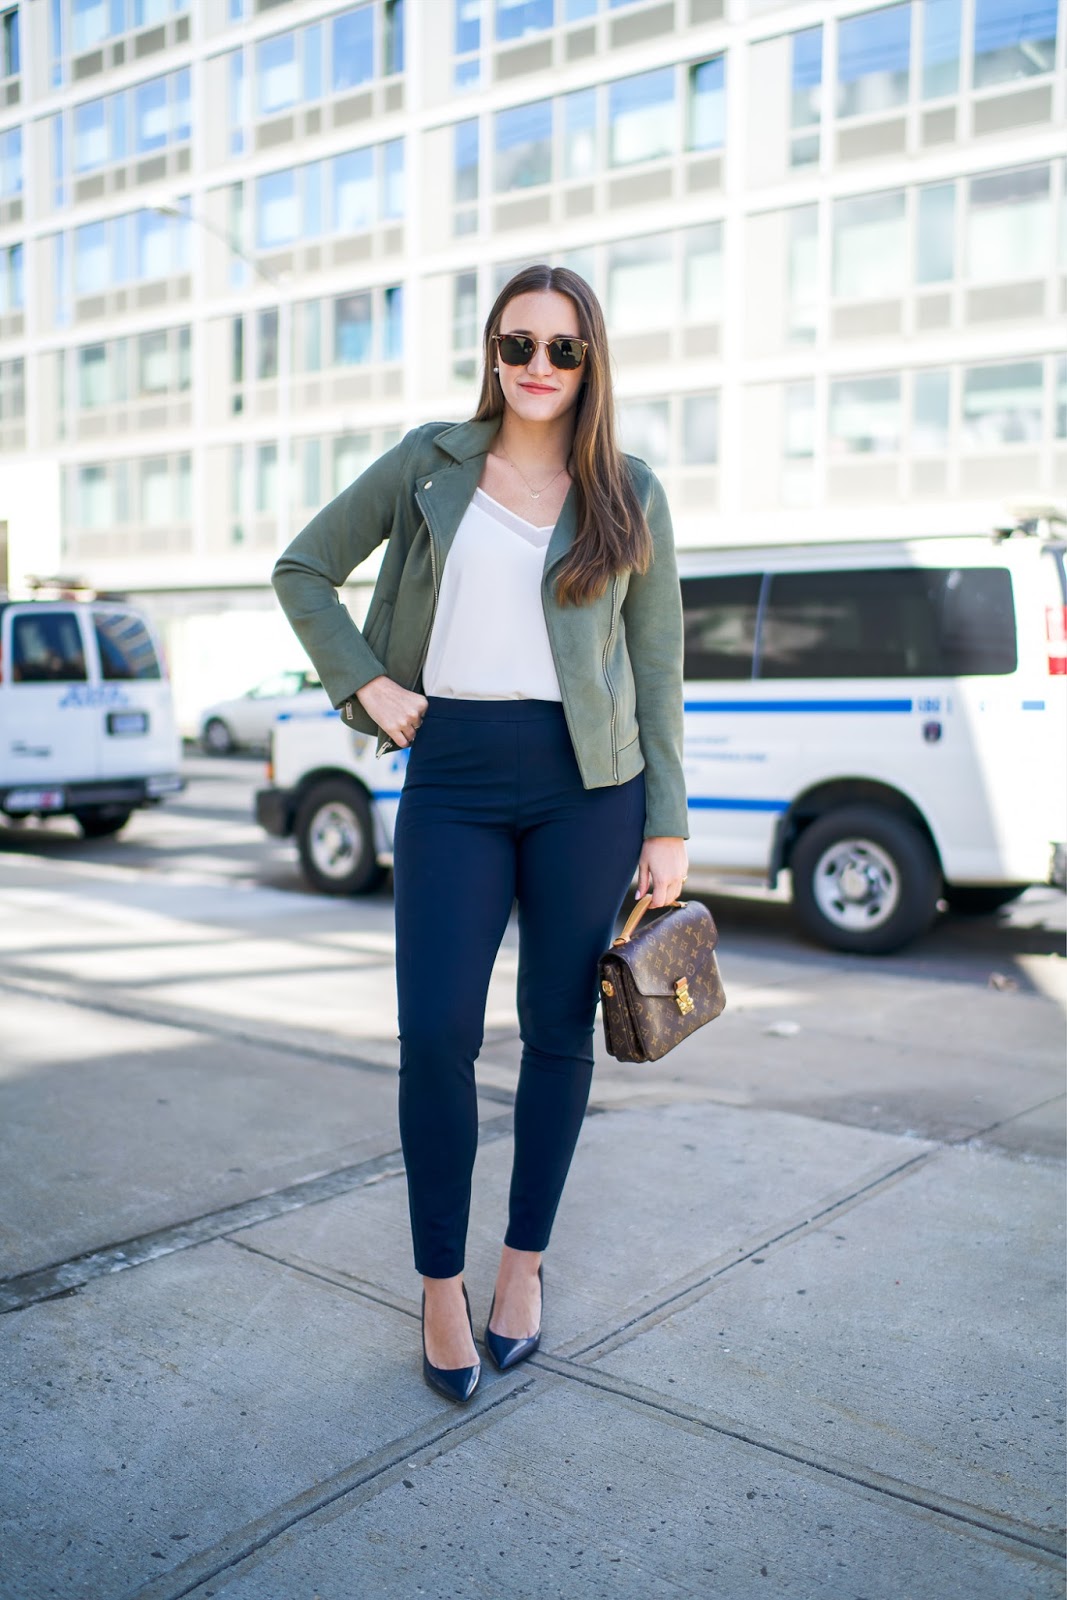 Old Navy Suede Moto Jacket by popular New York fashion blogger Covering the Bases